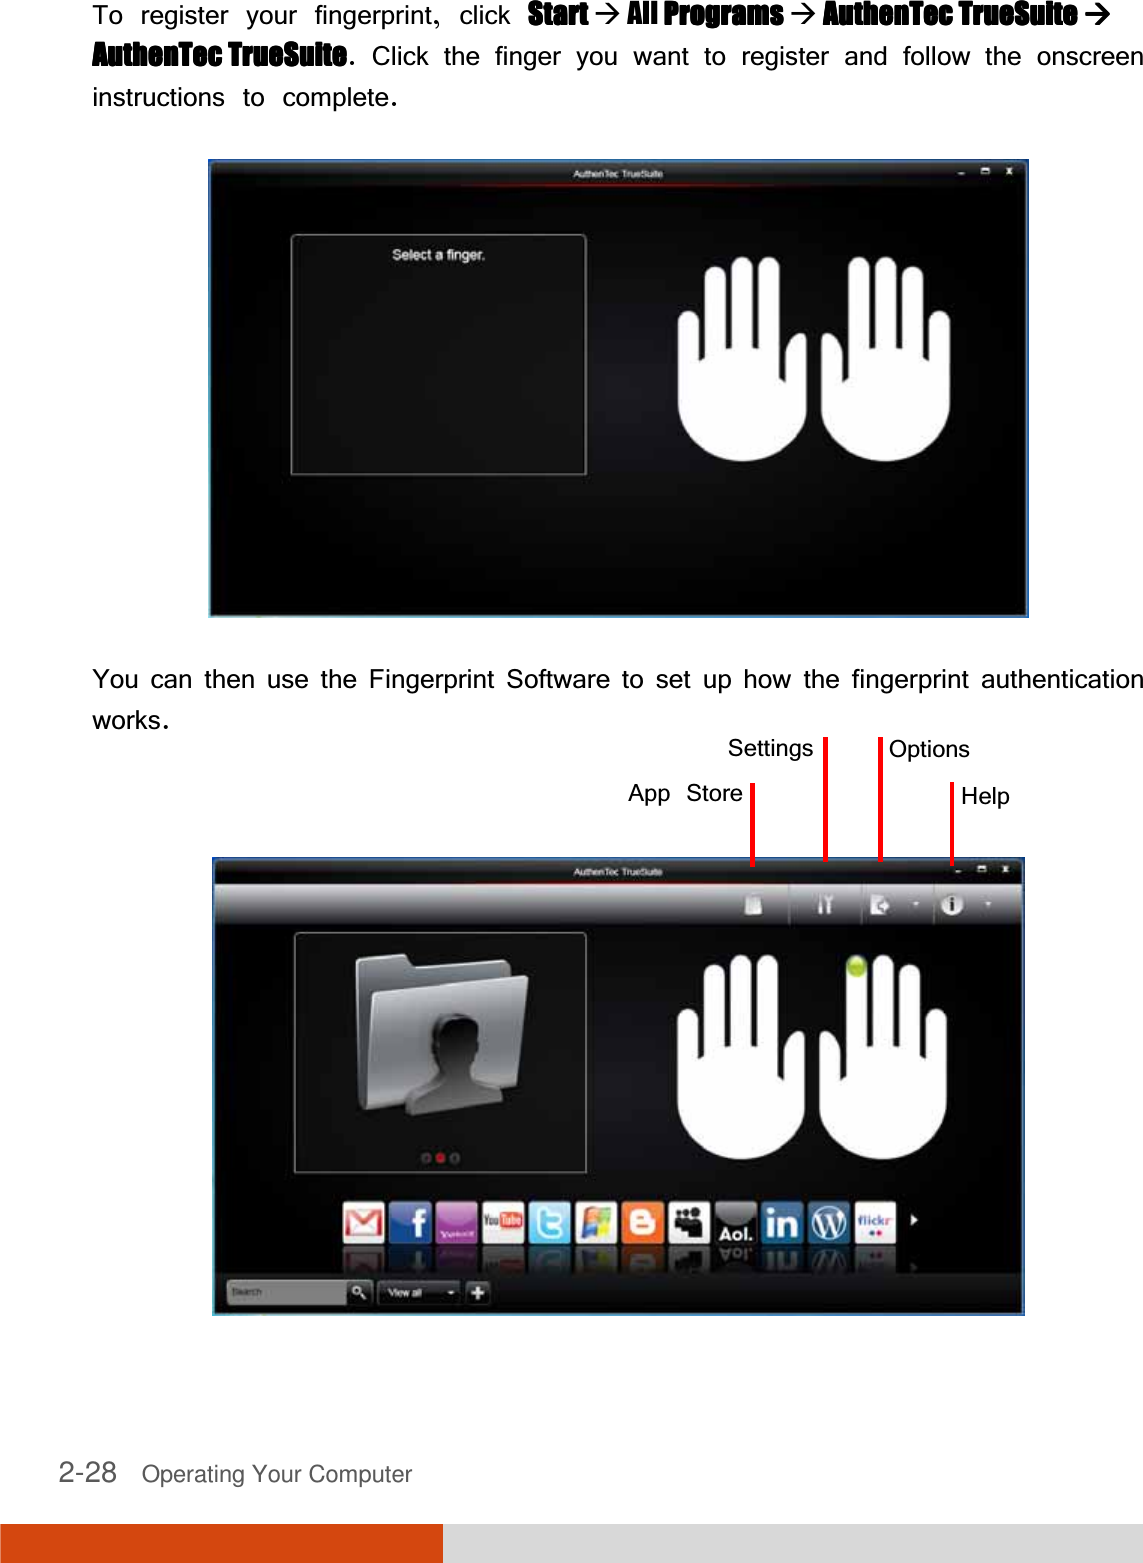 2-28   Operating Your Computer  To register your fingerprint, click StartStartStartStart  All ProgramsProgramsProgramsPrograms  AuthenTeAuthenTeAuthenTeAuthenTec TrueSuitec TrueSuitec TrueSuitec TrueSuite     AuthenTec TrueSuiteAuthenTec TrueSuiteAuthenTec TrueSuiteAuthenTec TrueSuite. Click the finger you want to register and follow the onscreen instructions to complete.  You can then use the Fingerprint Software to set up how the fingerprint authentication works.    App StoreSettings OptionsHelp